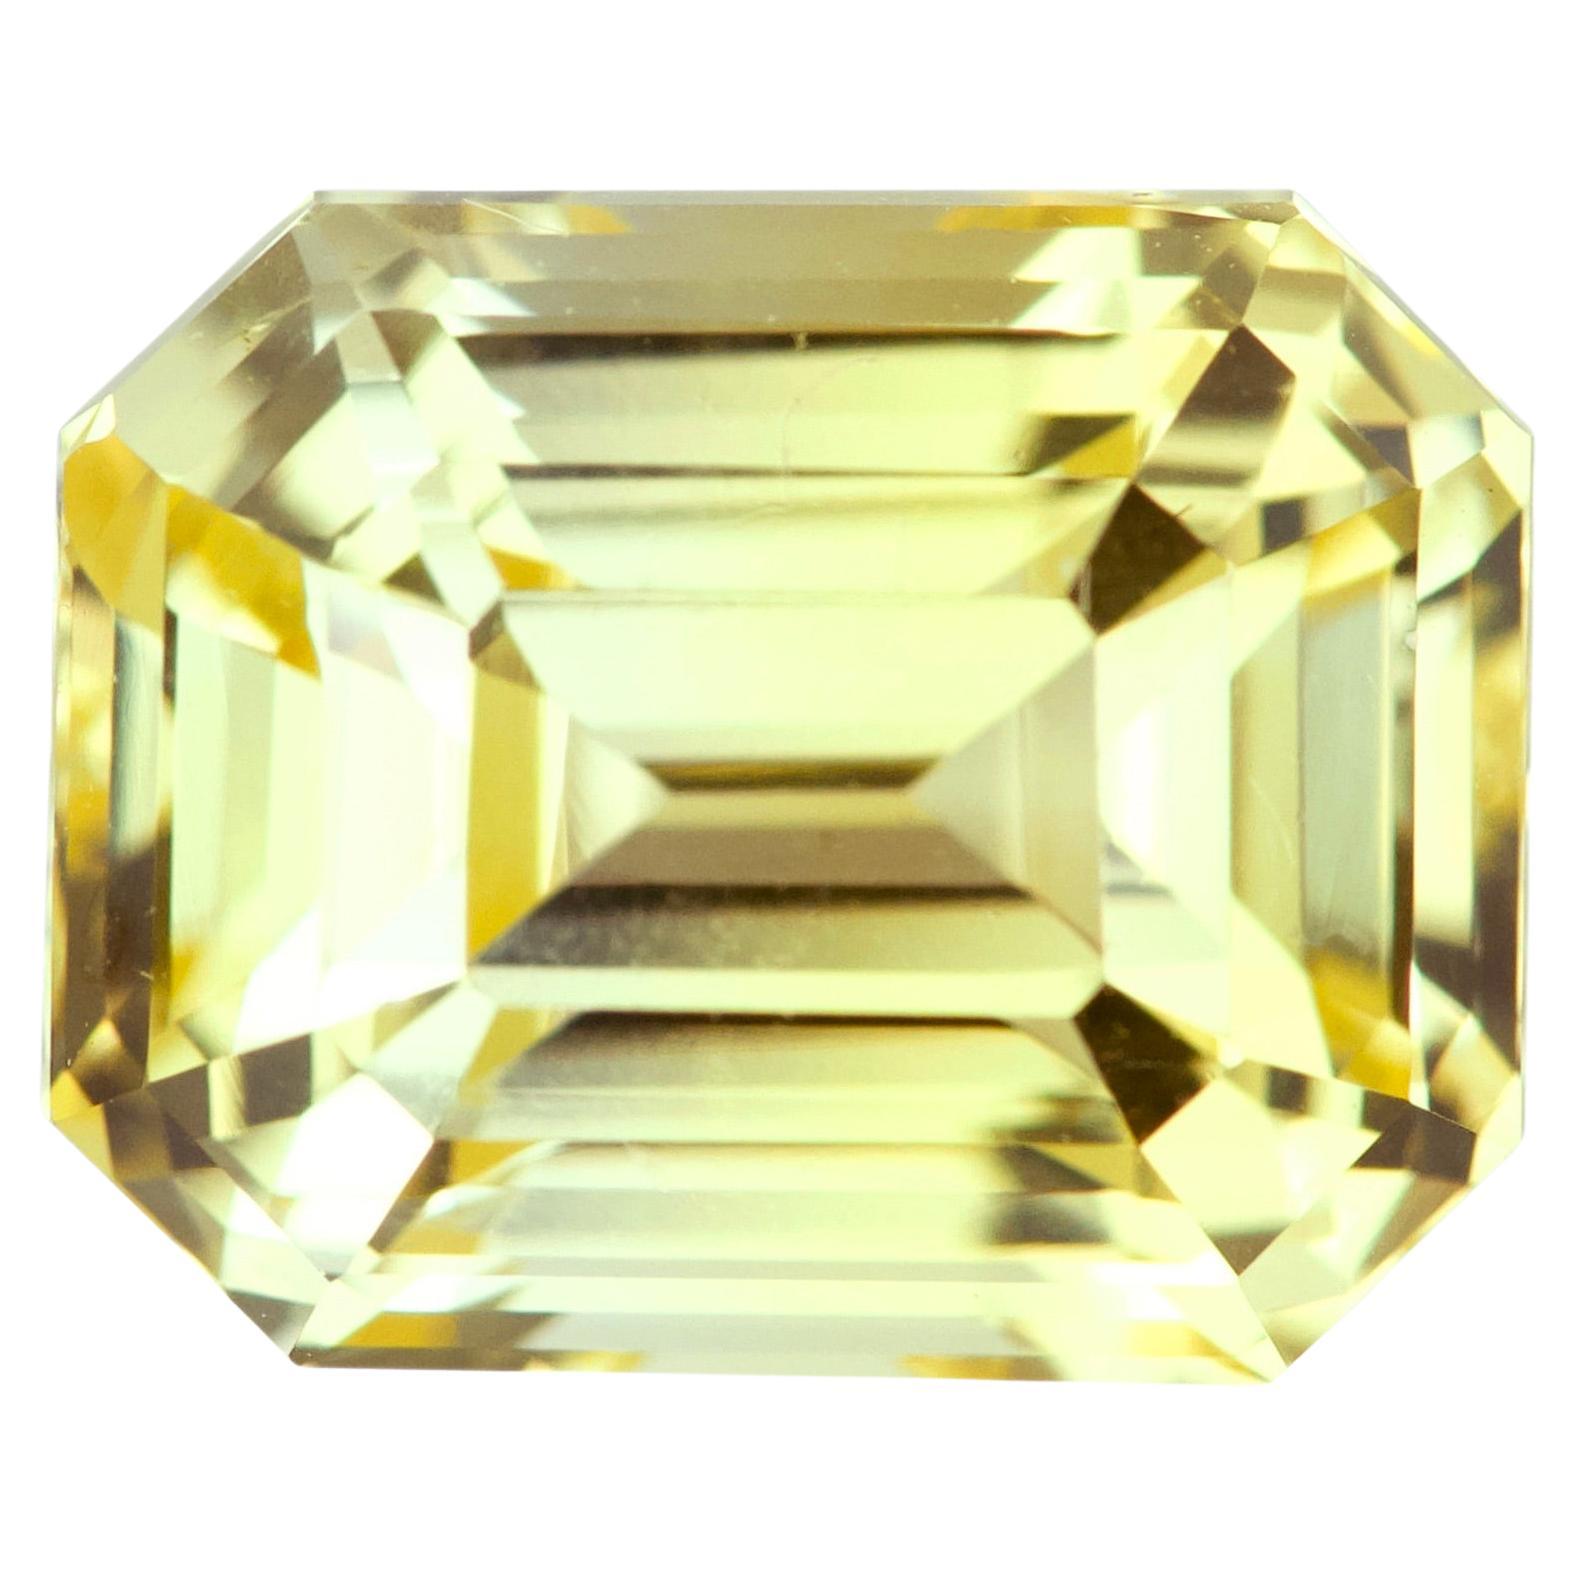 Vivid Yellow 5.09ct Sapphire Emerald Cut Natural Unheated, Loose Gemstone (pierre précieuse non chauffée)